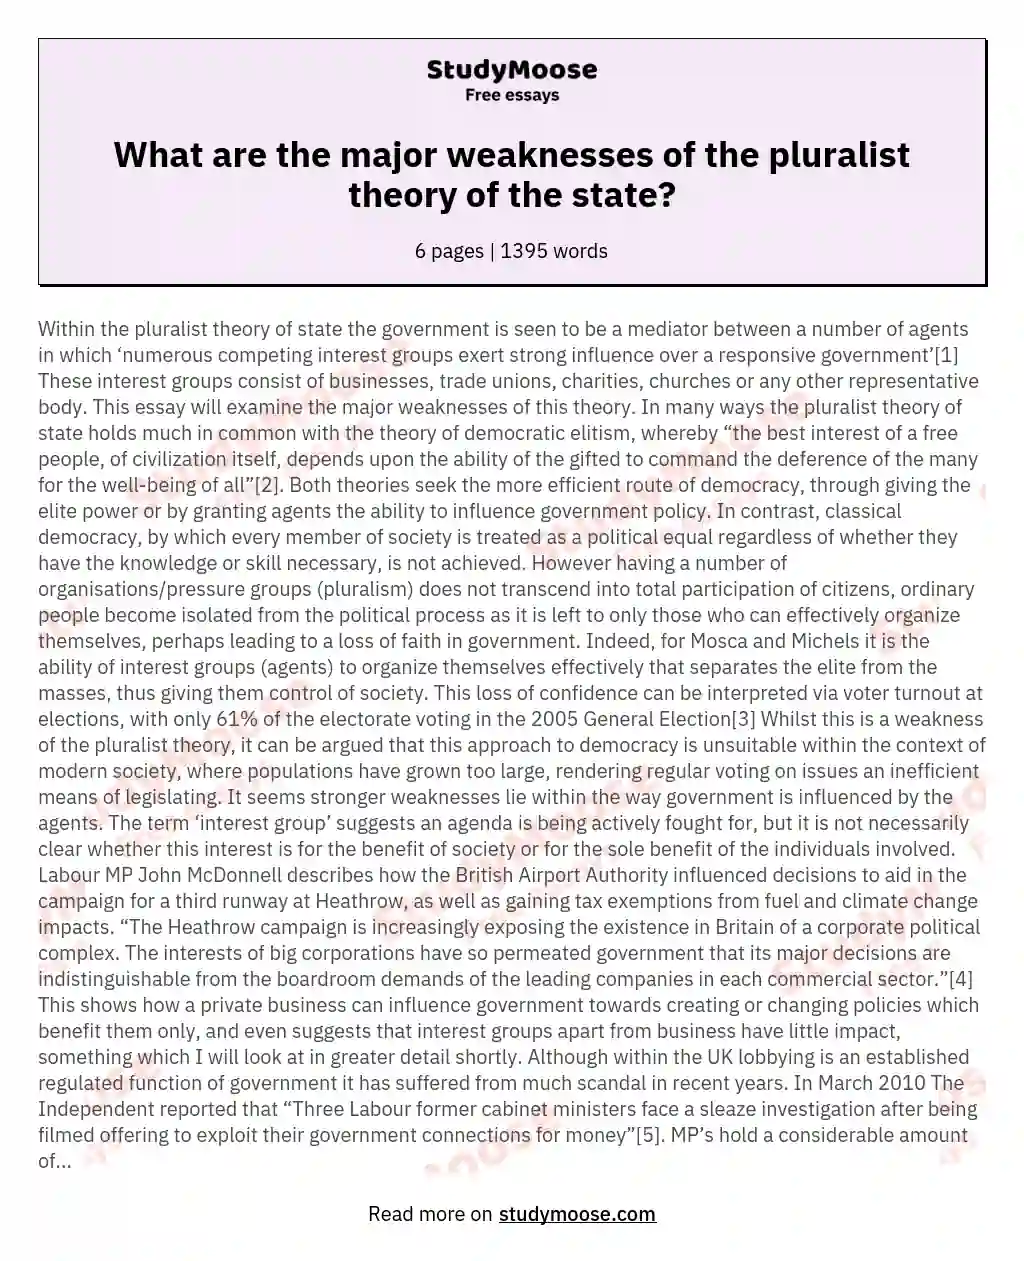 What are the major weaknesses of the pluralist theory of the state? essay